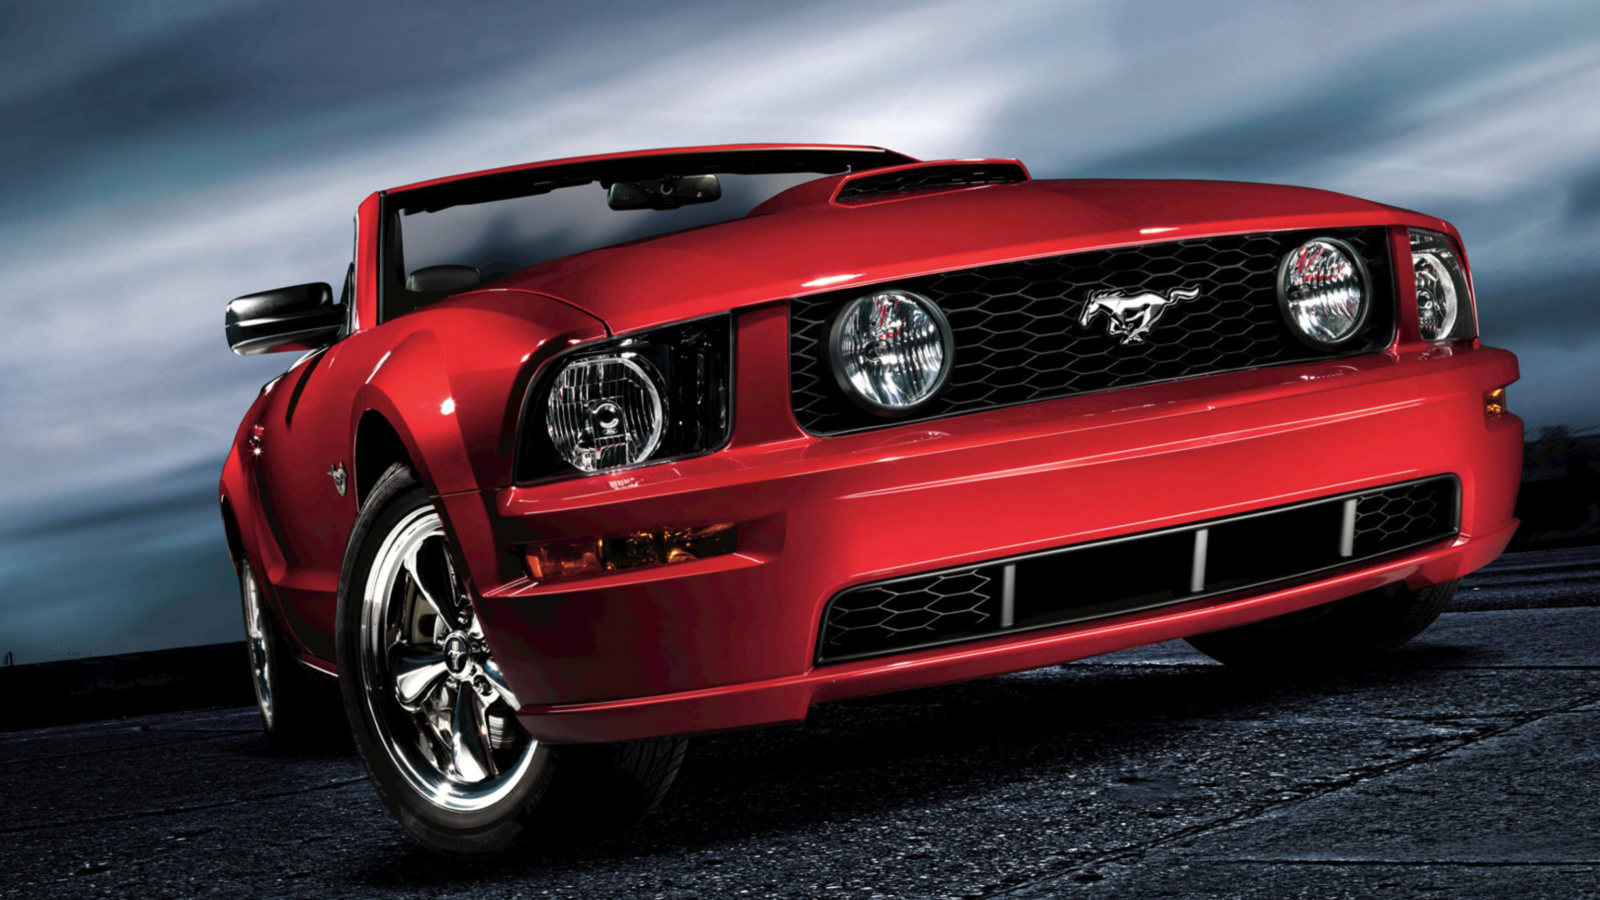 Ford Mustang Shelby GT500 wallpaper 1600x900